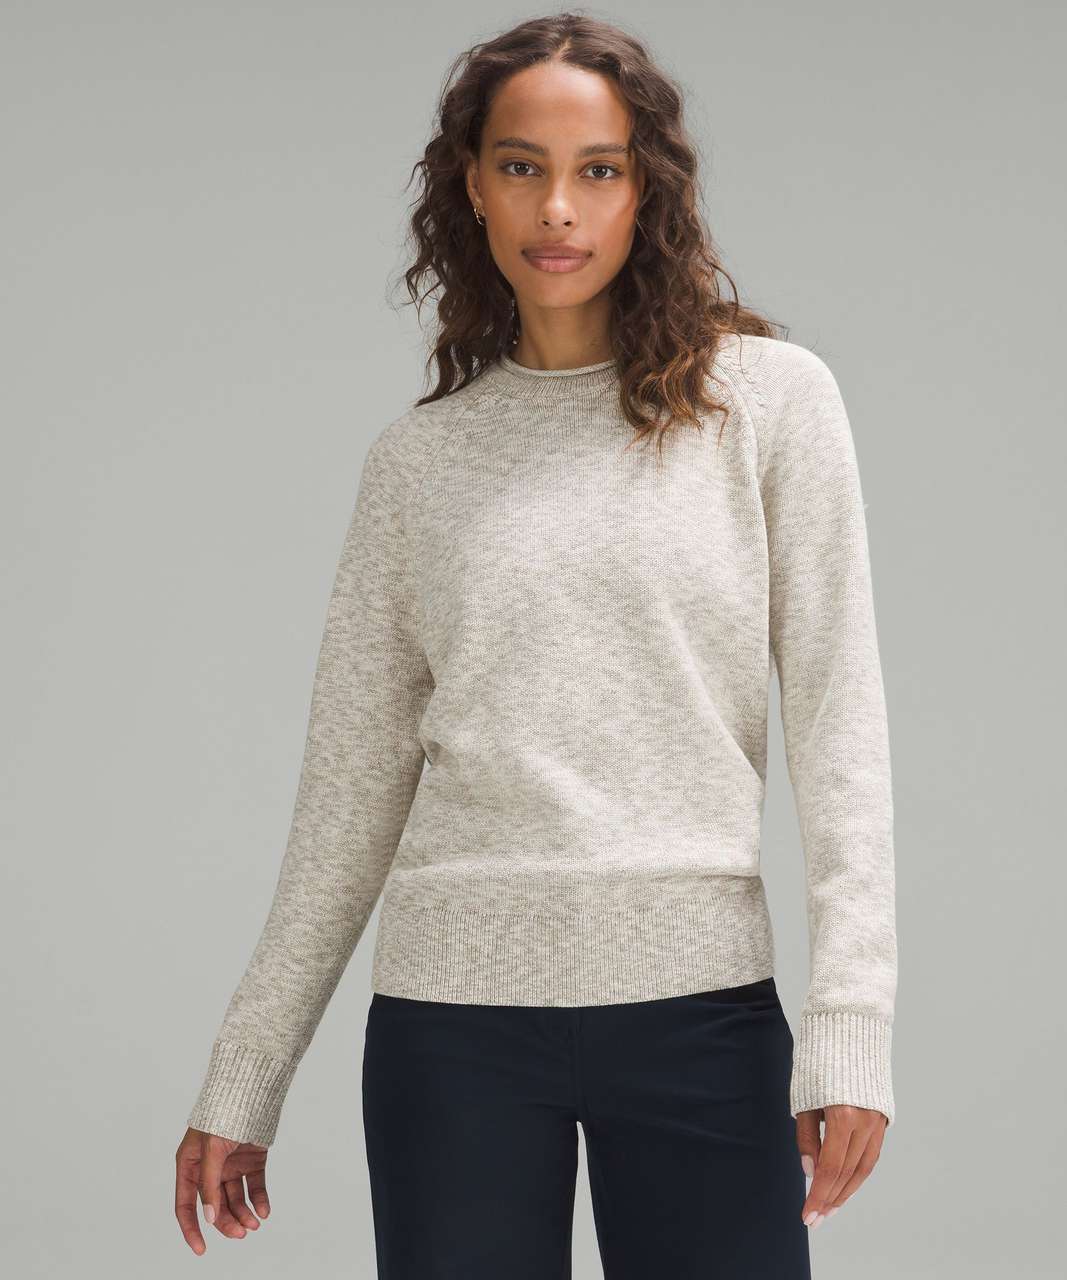 white lululemon sweater - OFF-70% >Free Delivery